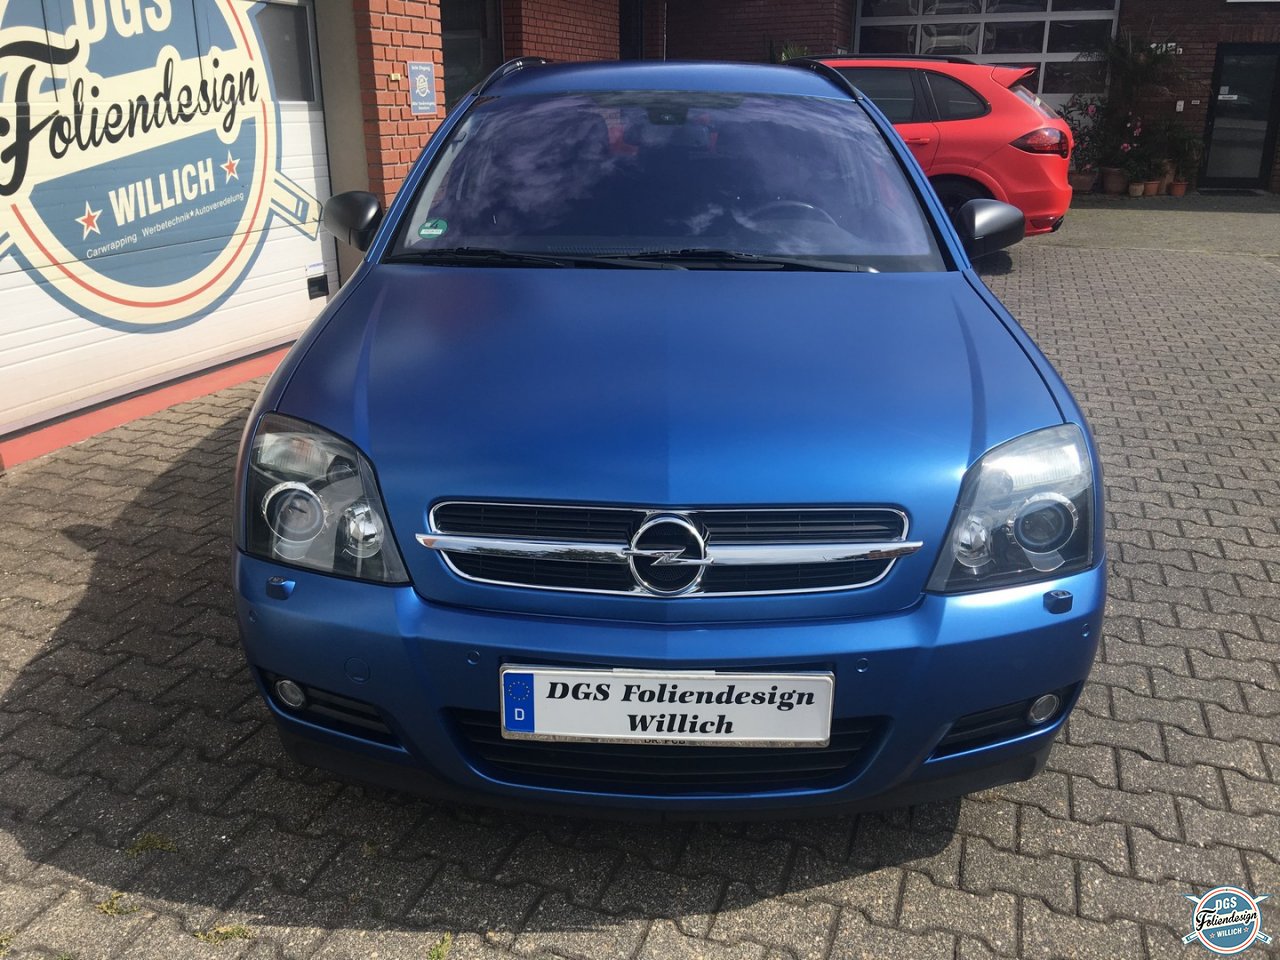 Vollfolierung - Opel Vectra C - DGS-Wrapping & Foliendesign